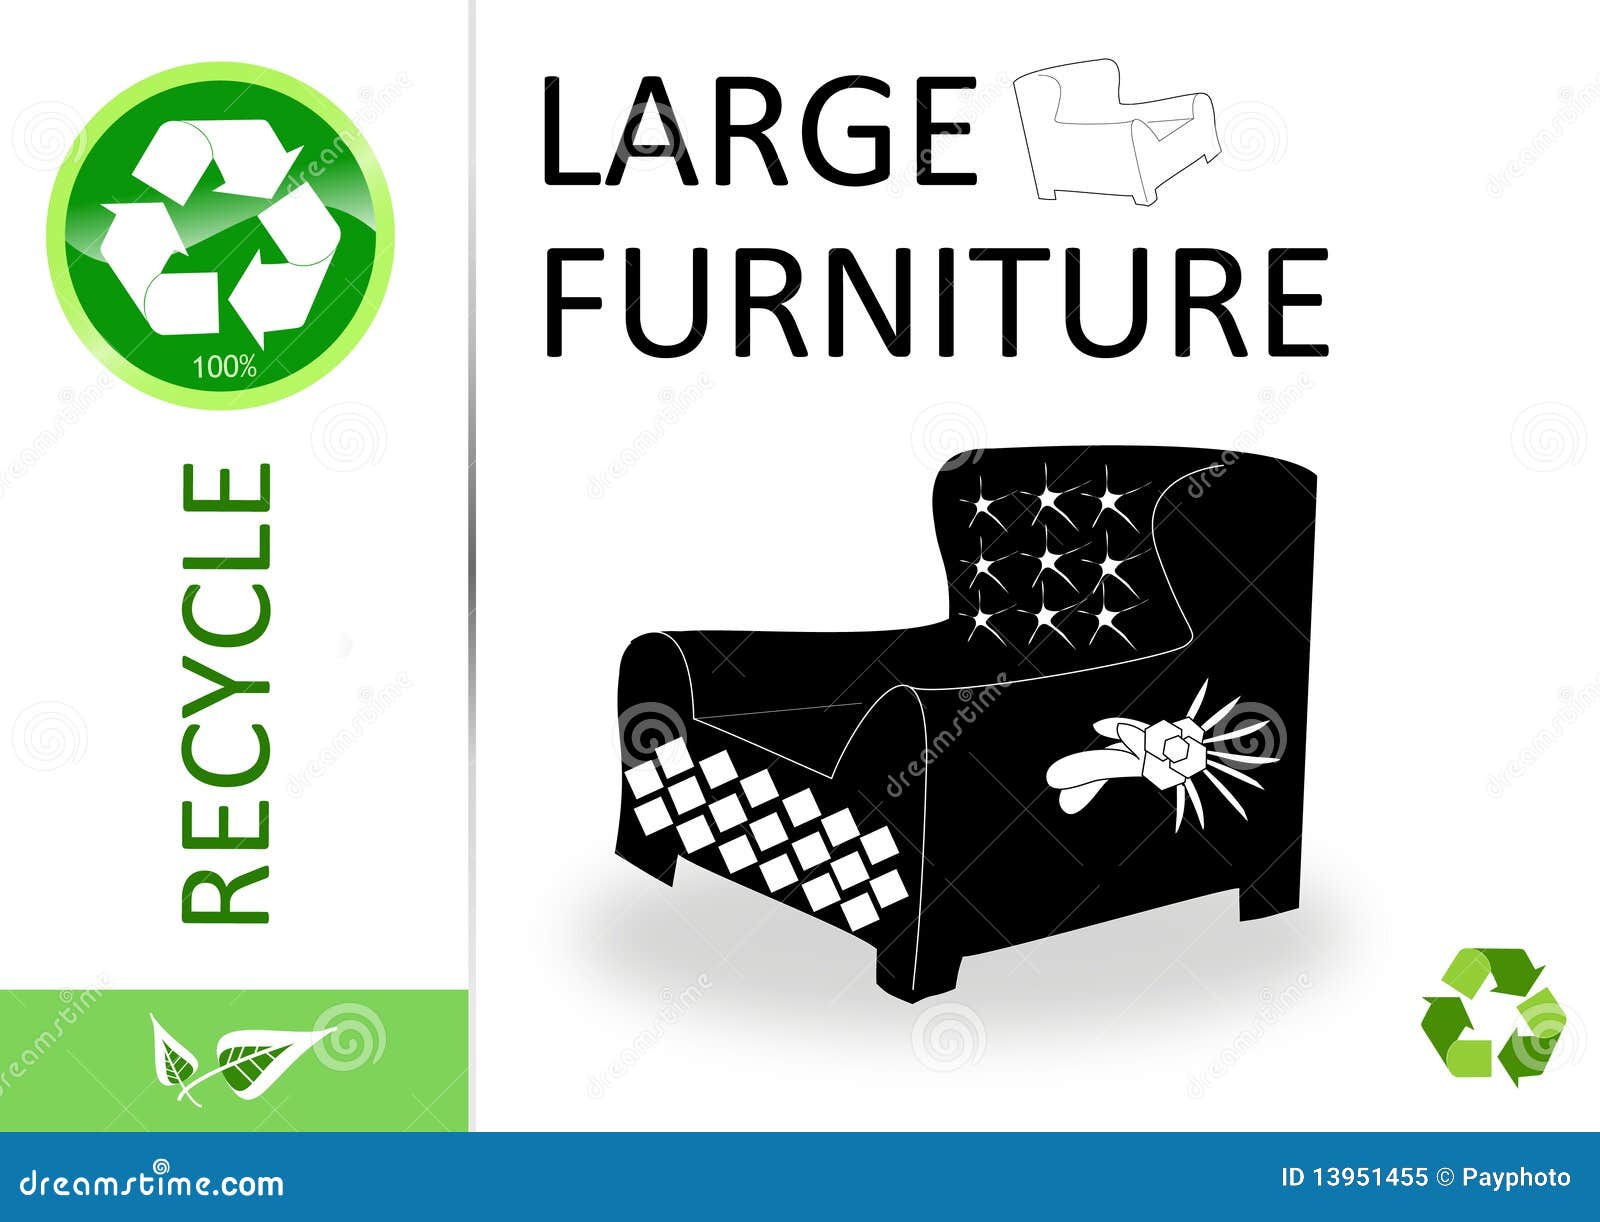 Royalty Free Stock Photo: Please recycle large furniture